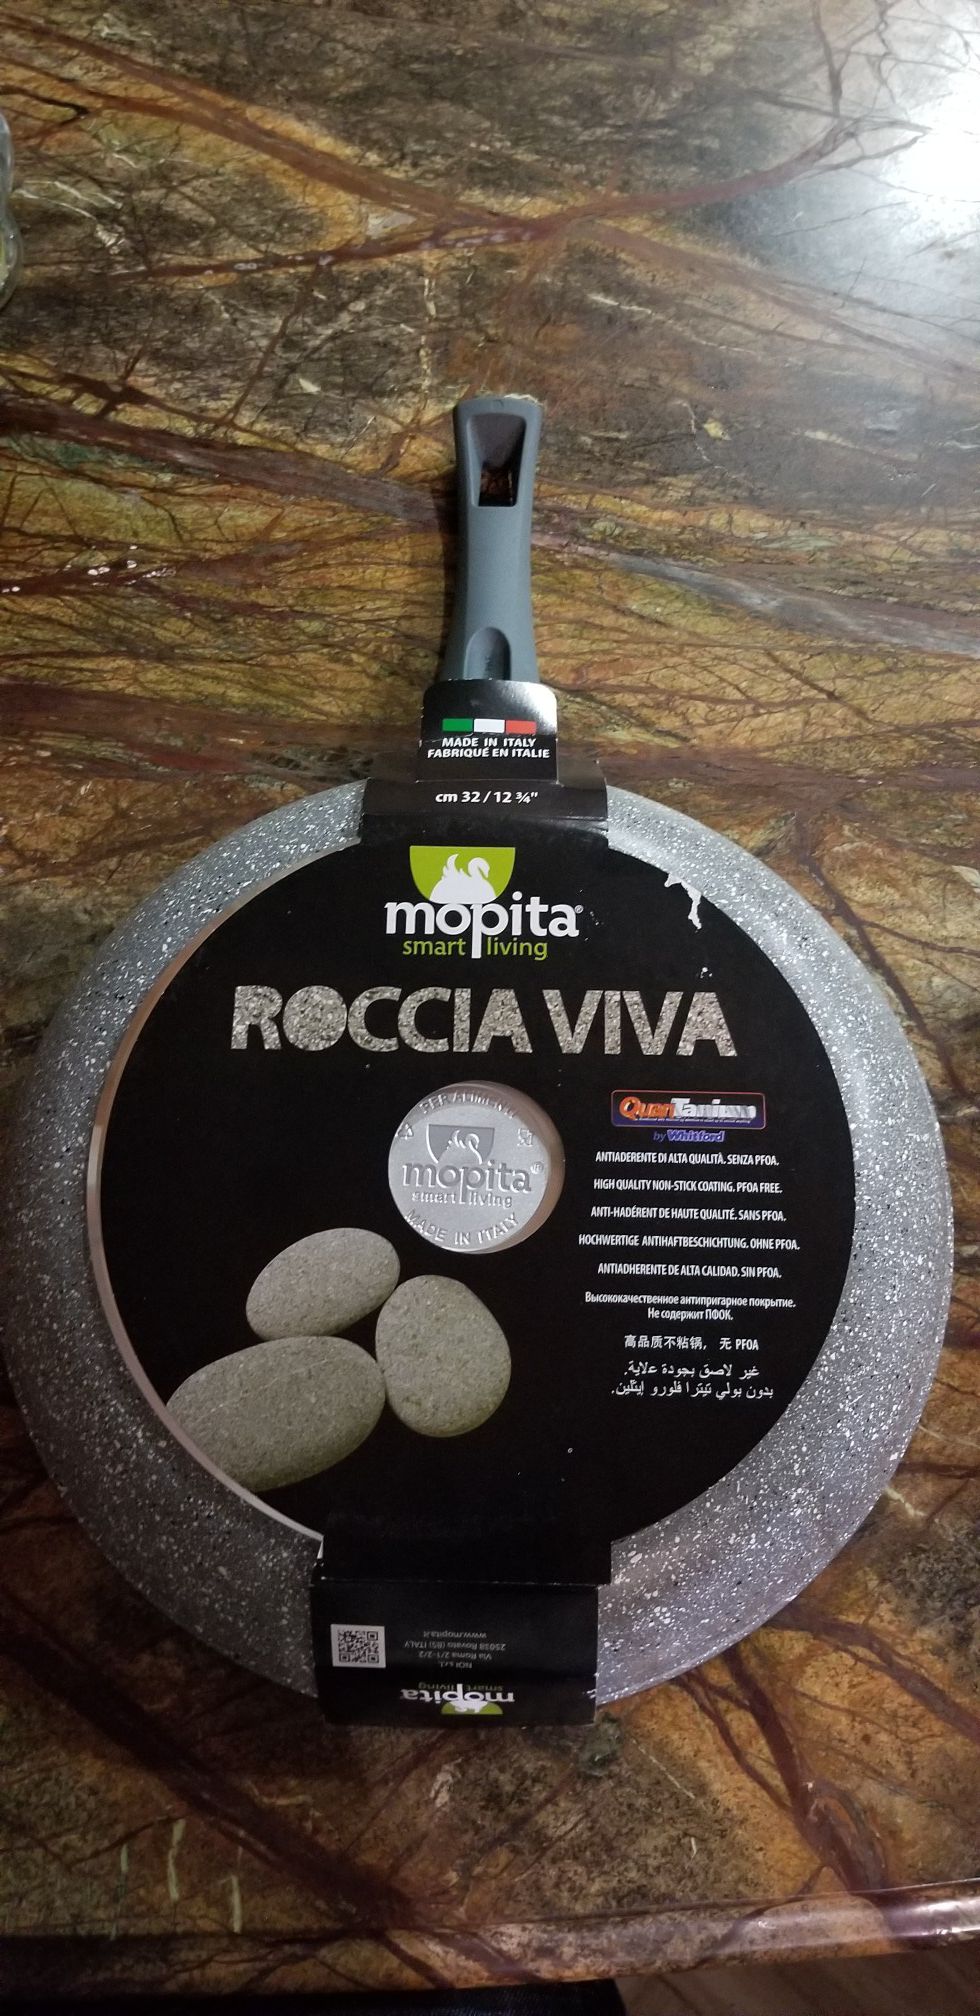 Pan - Roccia Viva for Sale in Columbia, MD - OfferUp